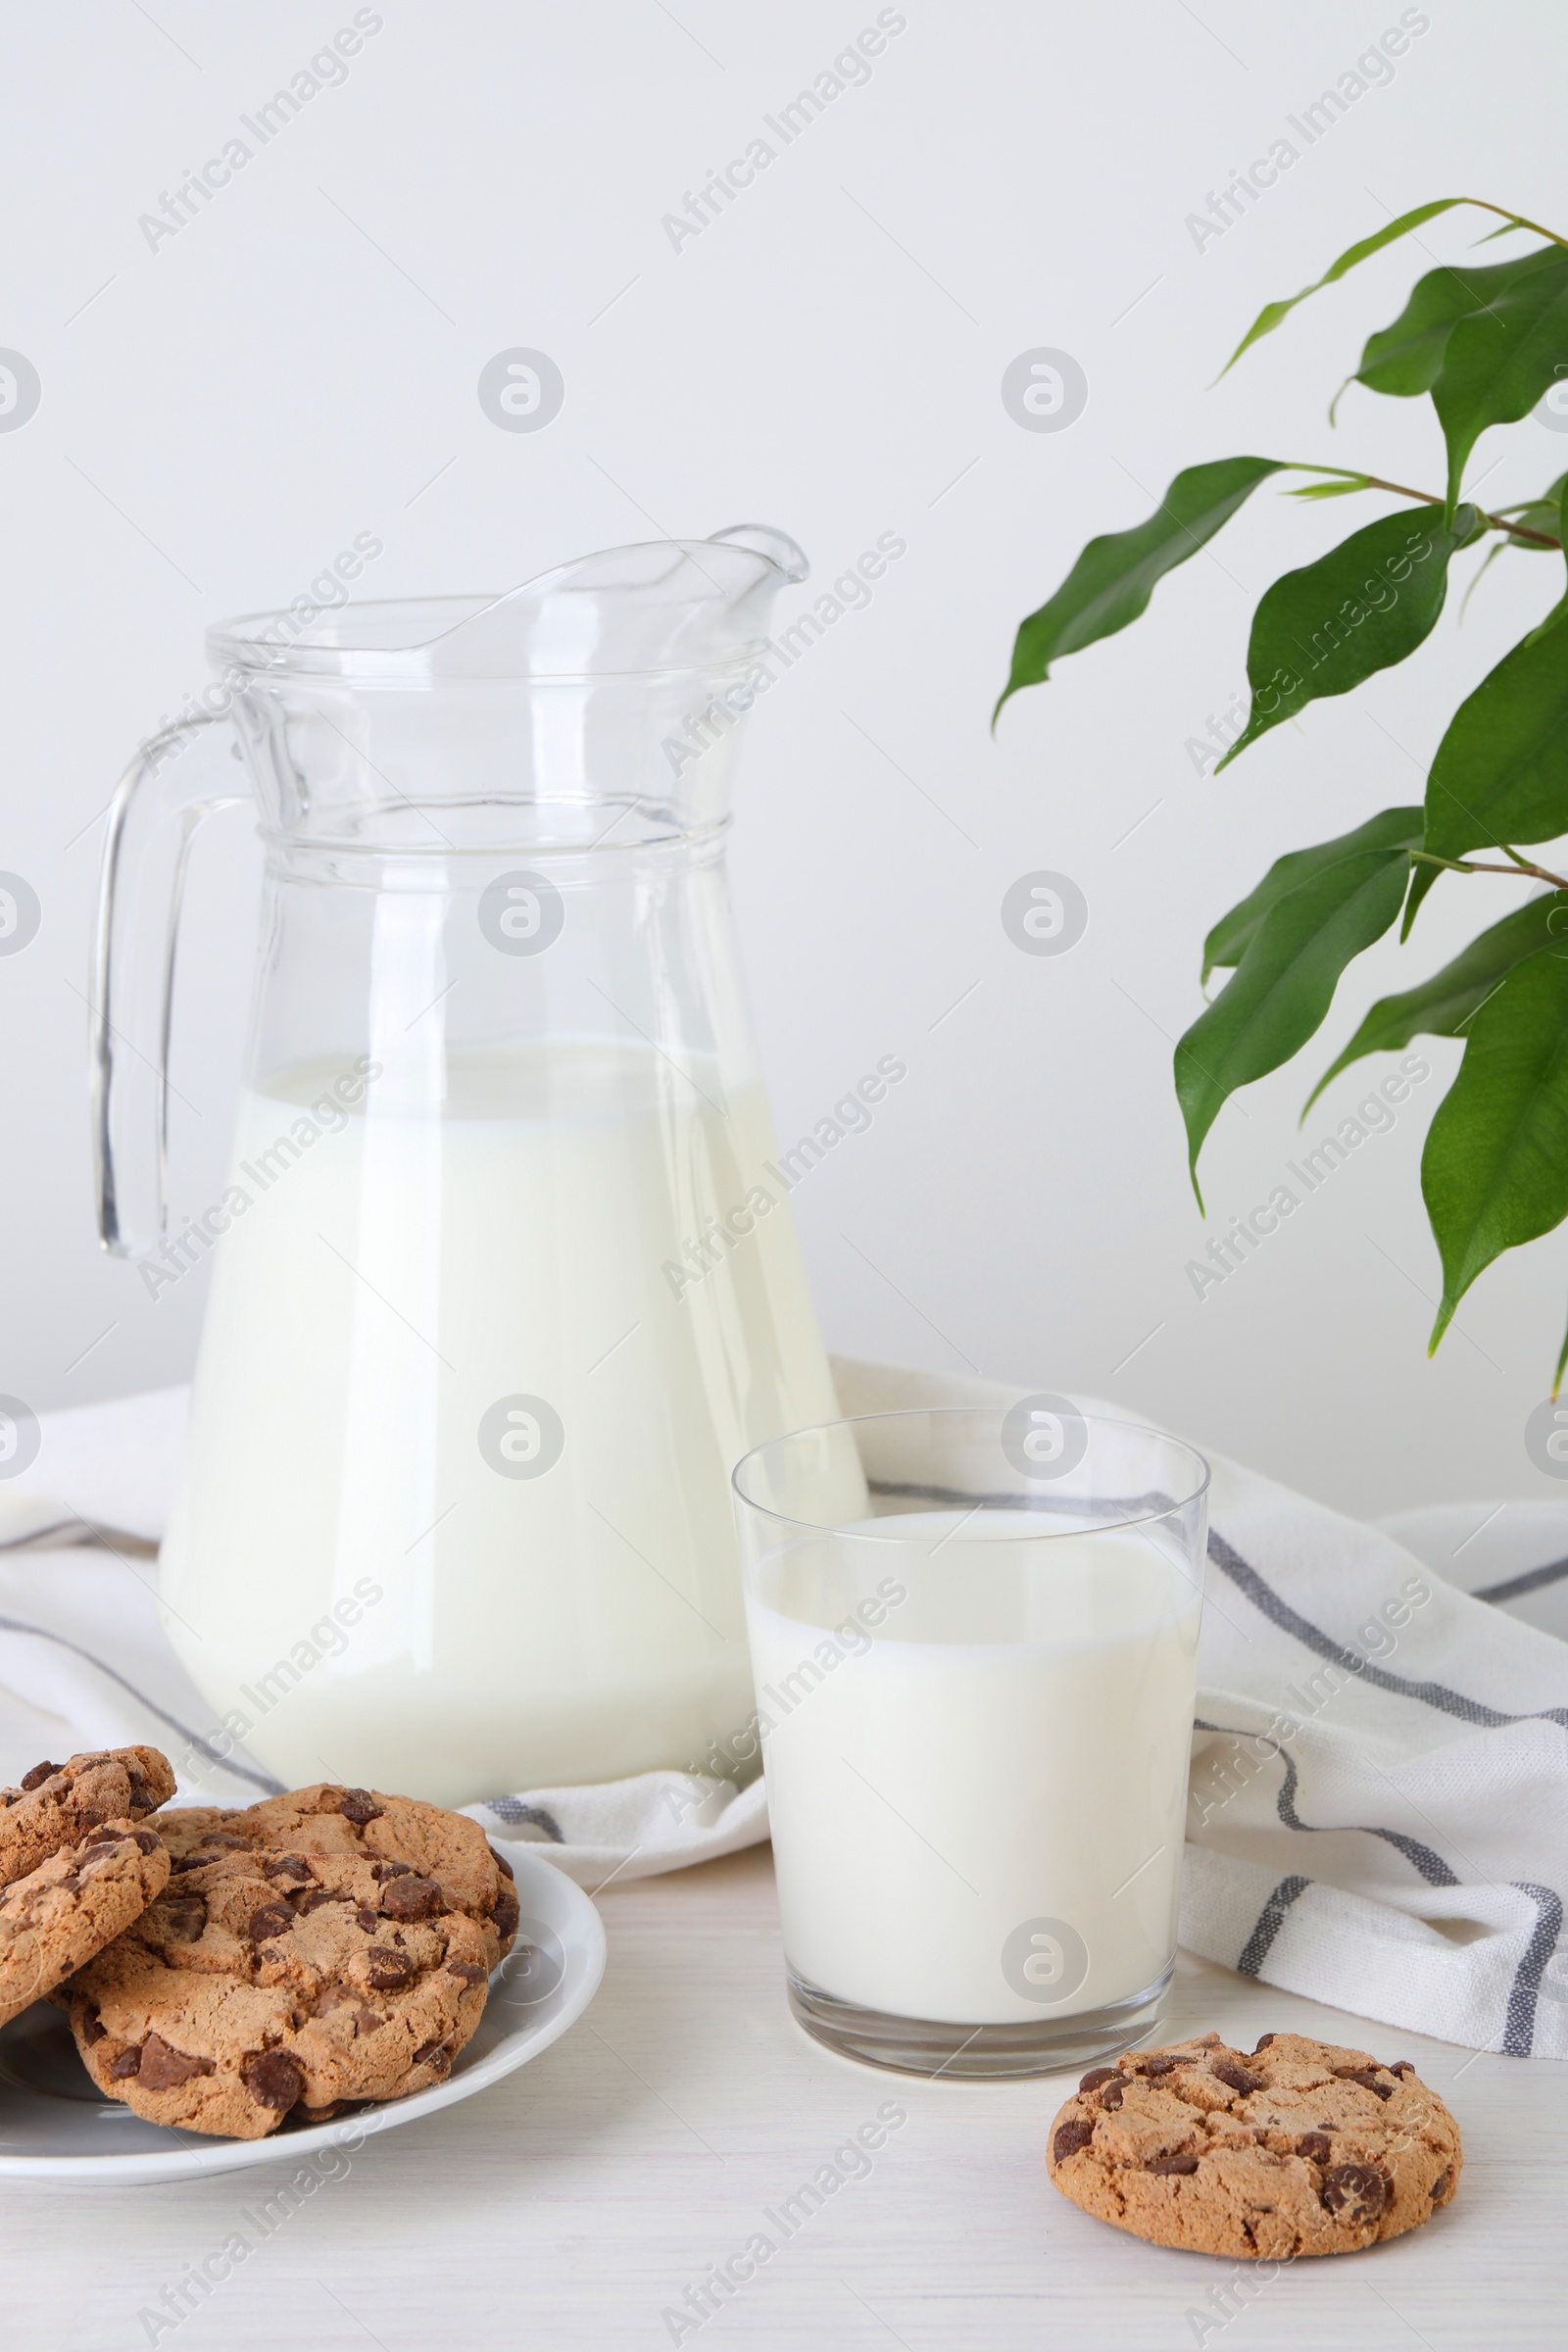 Photo of Jug of fresh milk, glass and cookies on wooden table